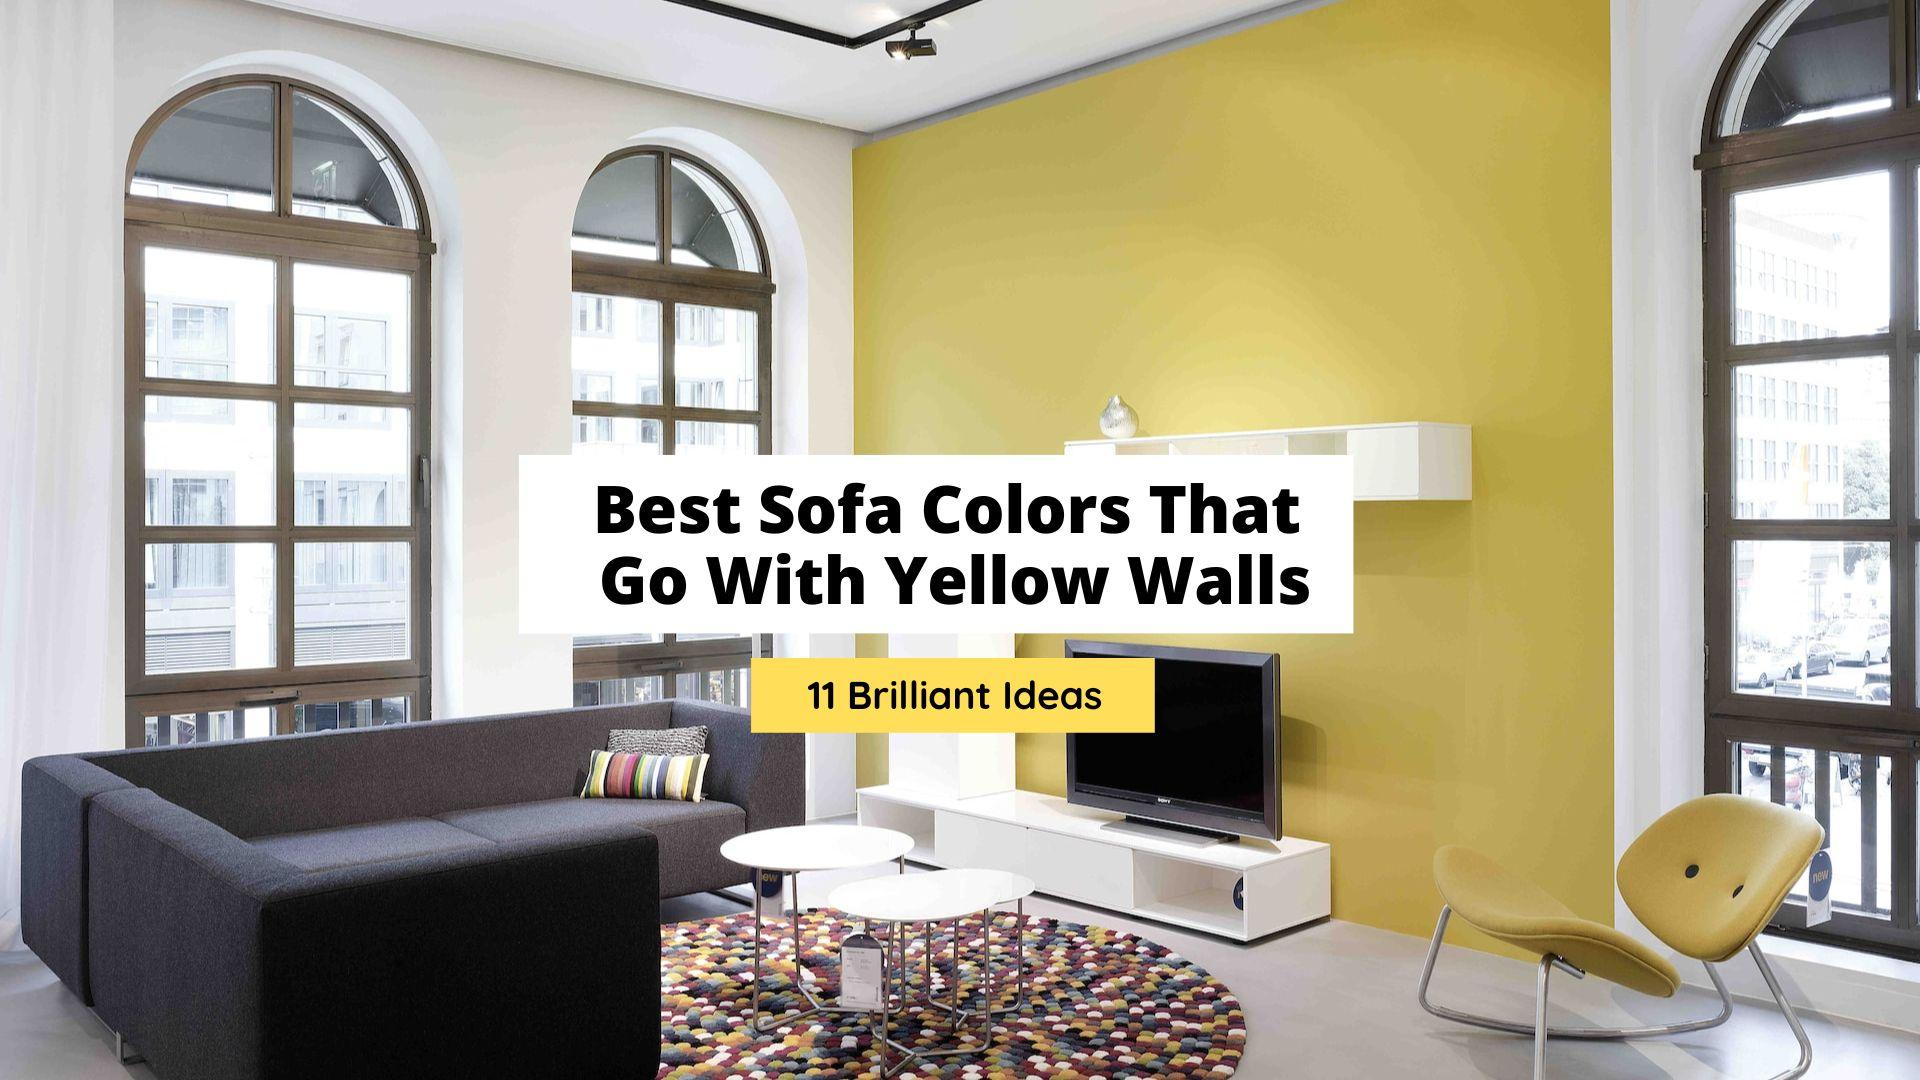 Best Sofa Colors That Go With Yellow Walls